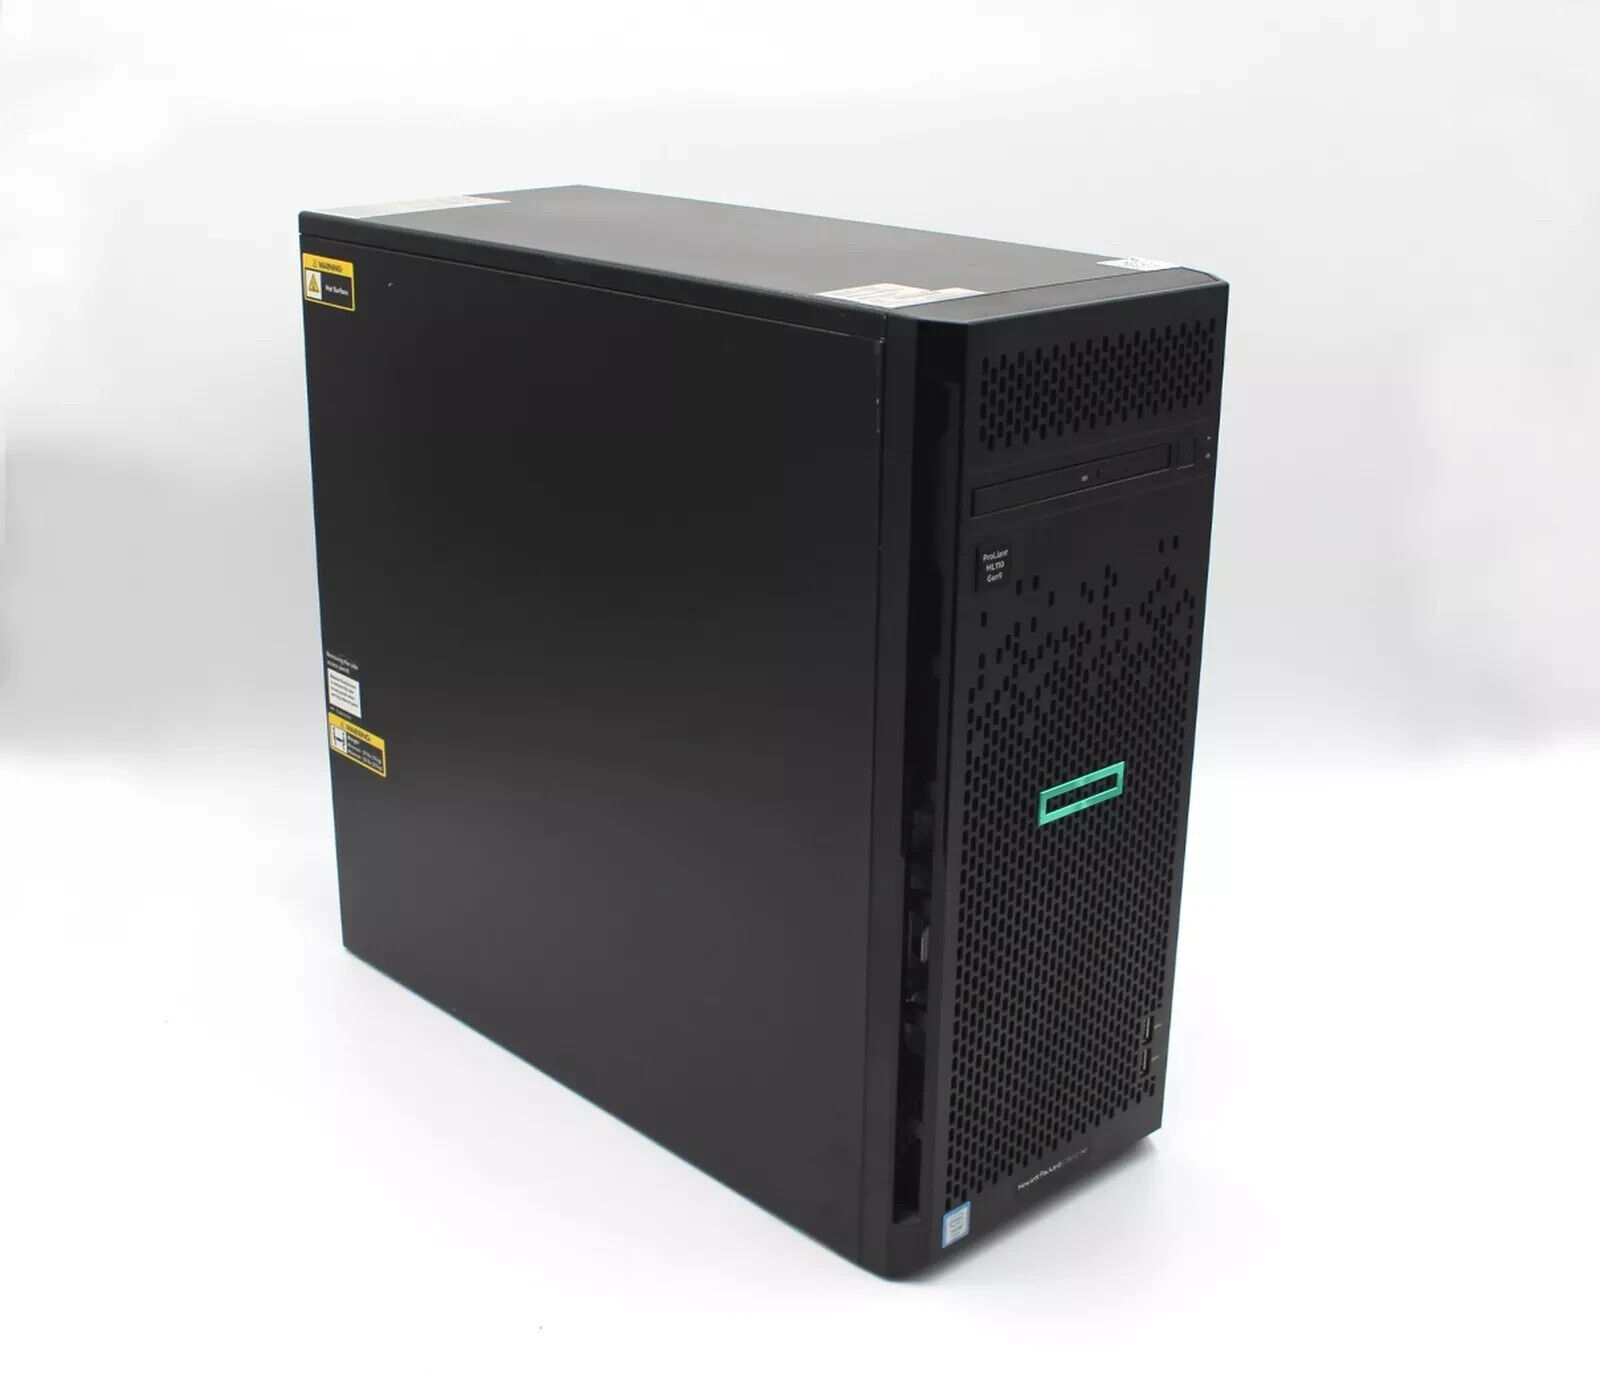 HPE Proliant ML110 Gen9   128GB RAM   12 TB HDDs   NO OS   Great Condition